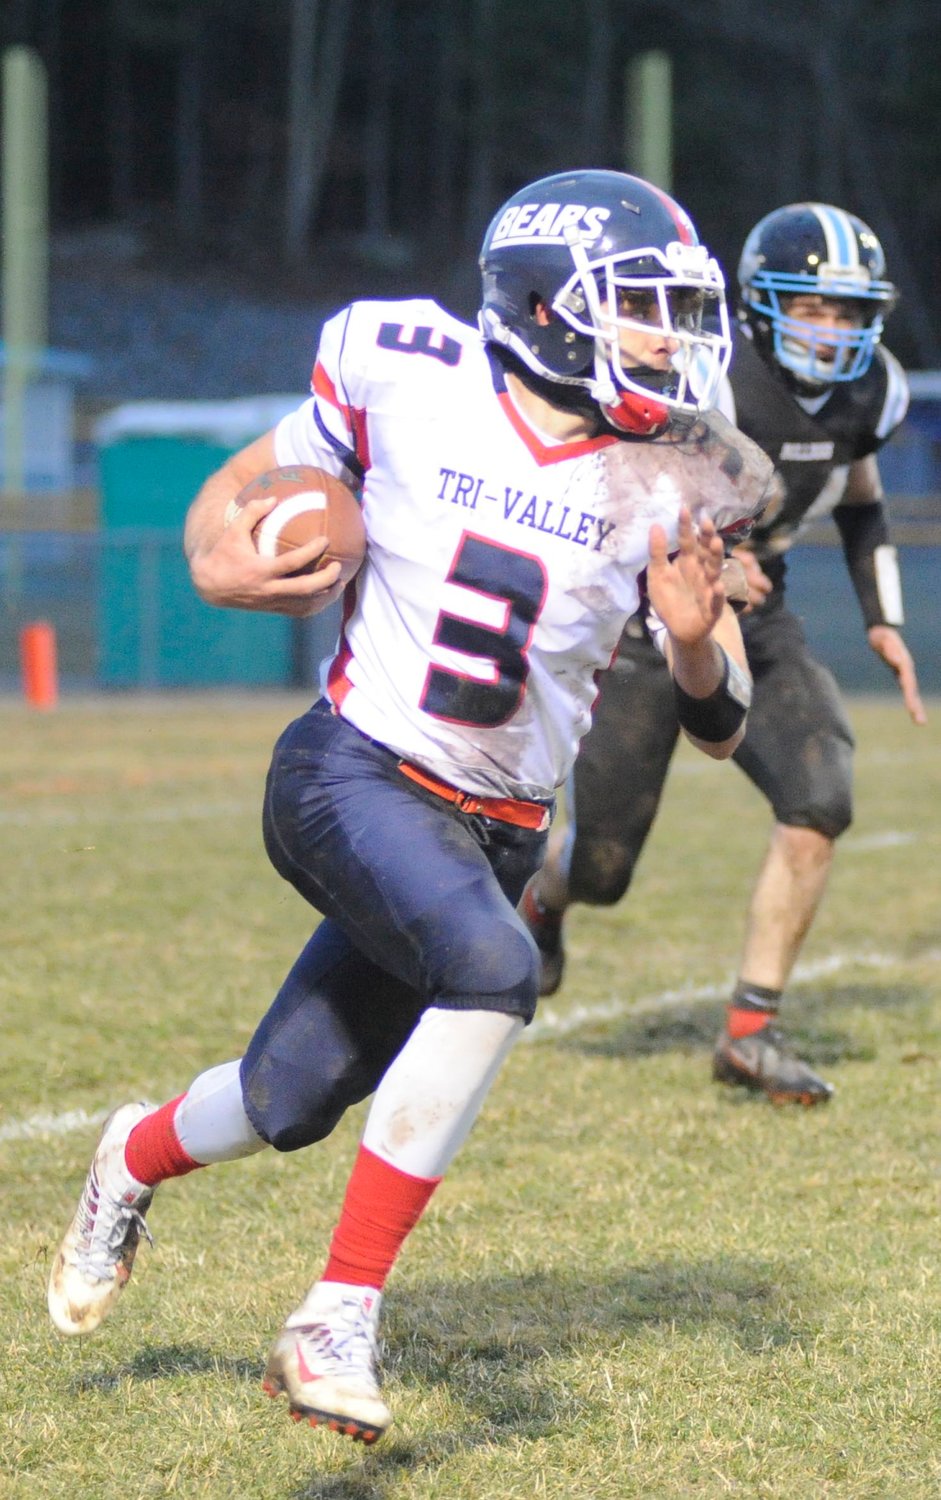 Just a few more yards. Tri-Valley’s running back posted 74 yards on 11 carries.